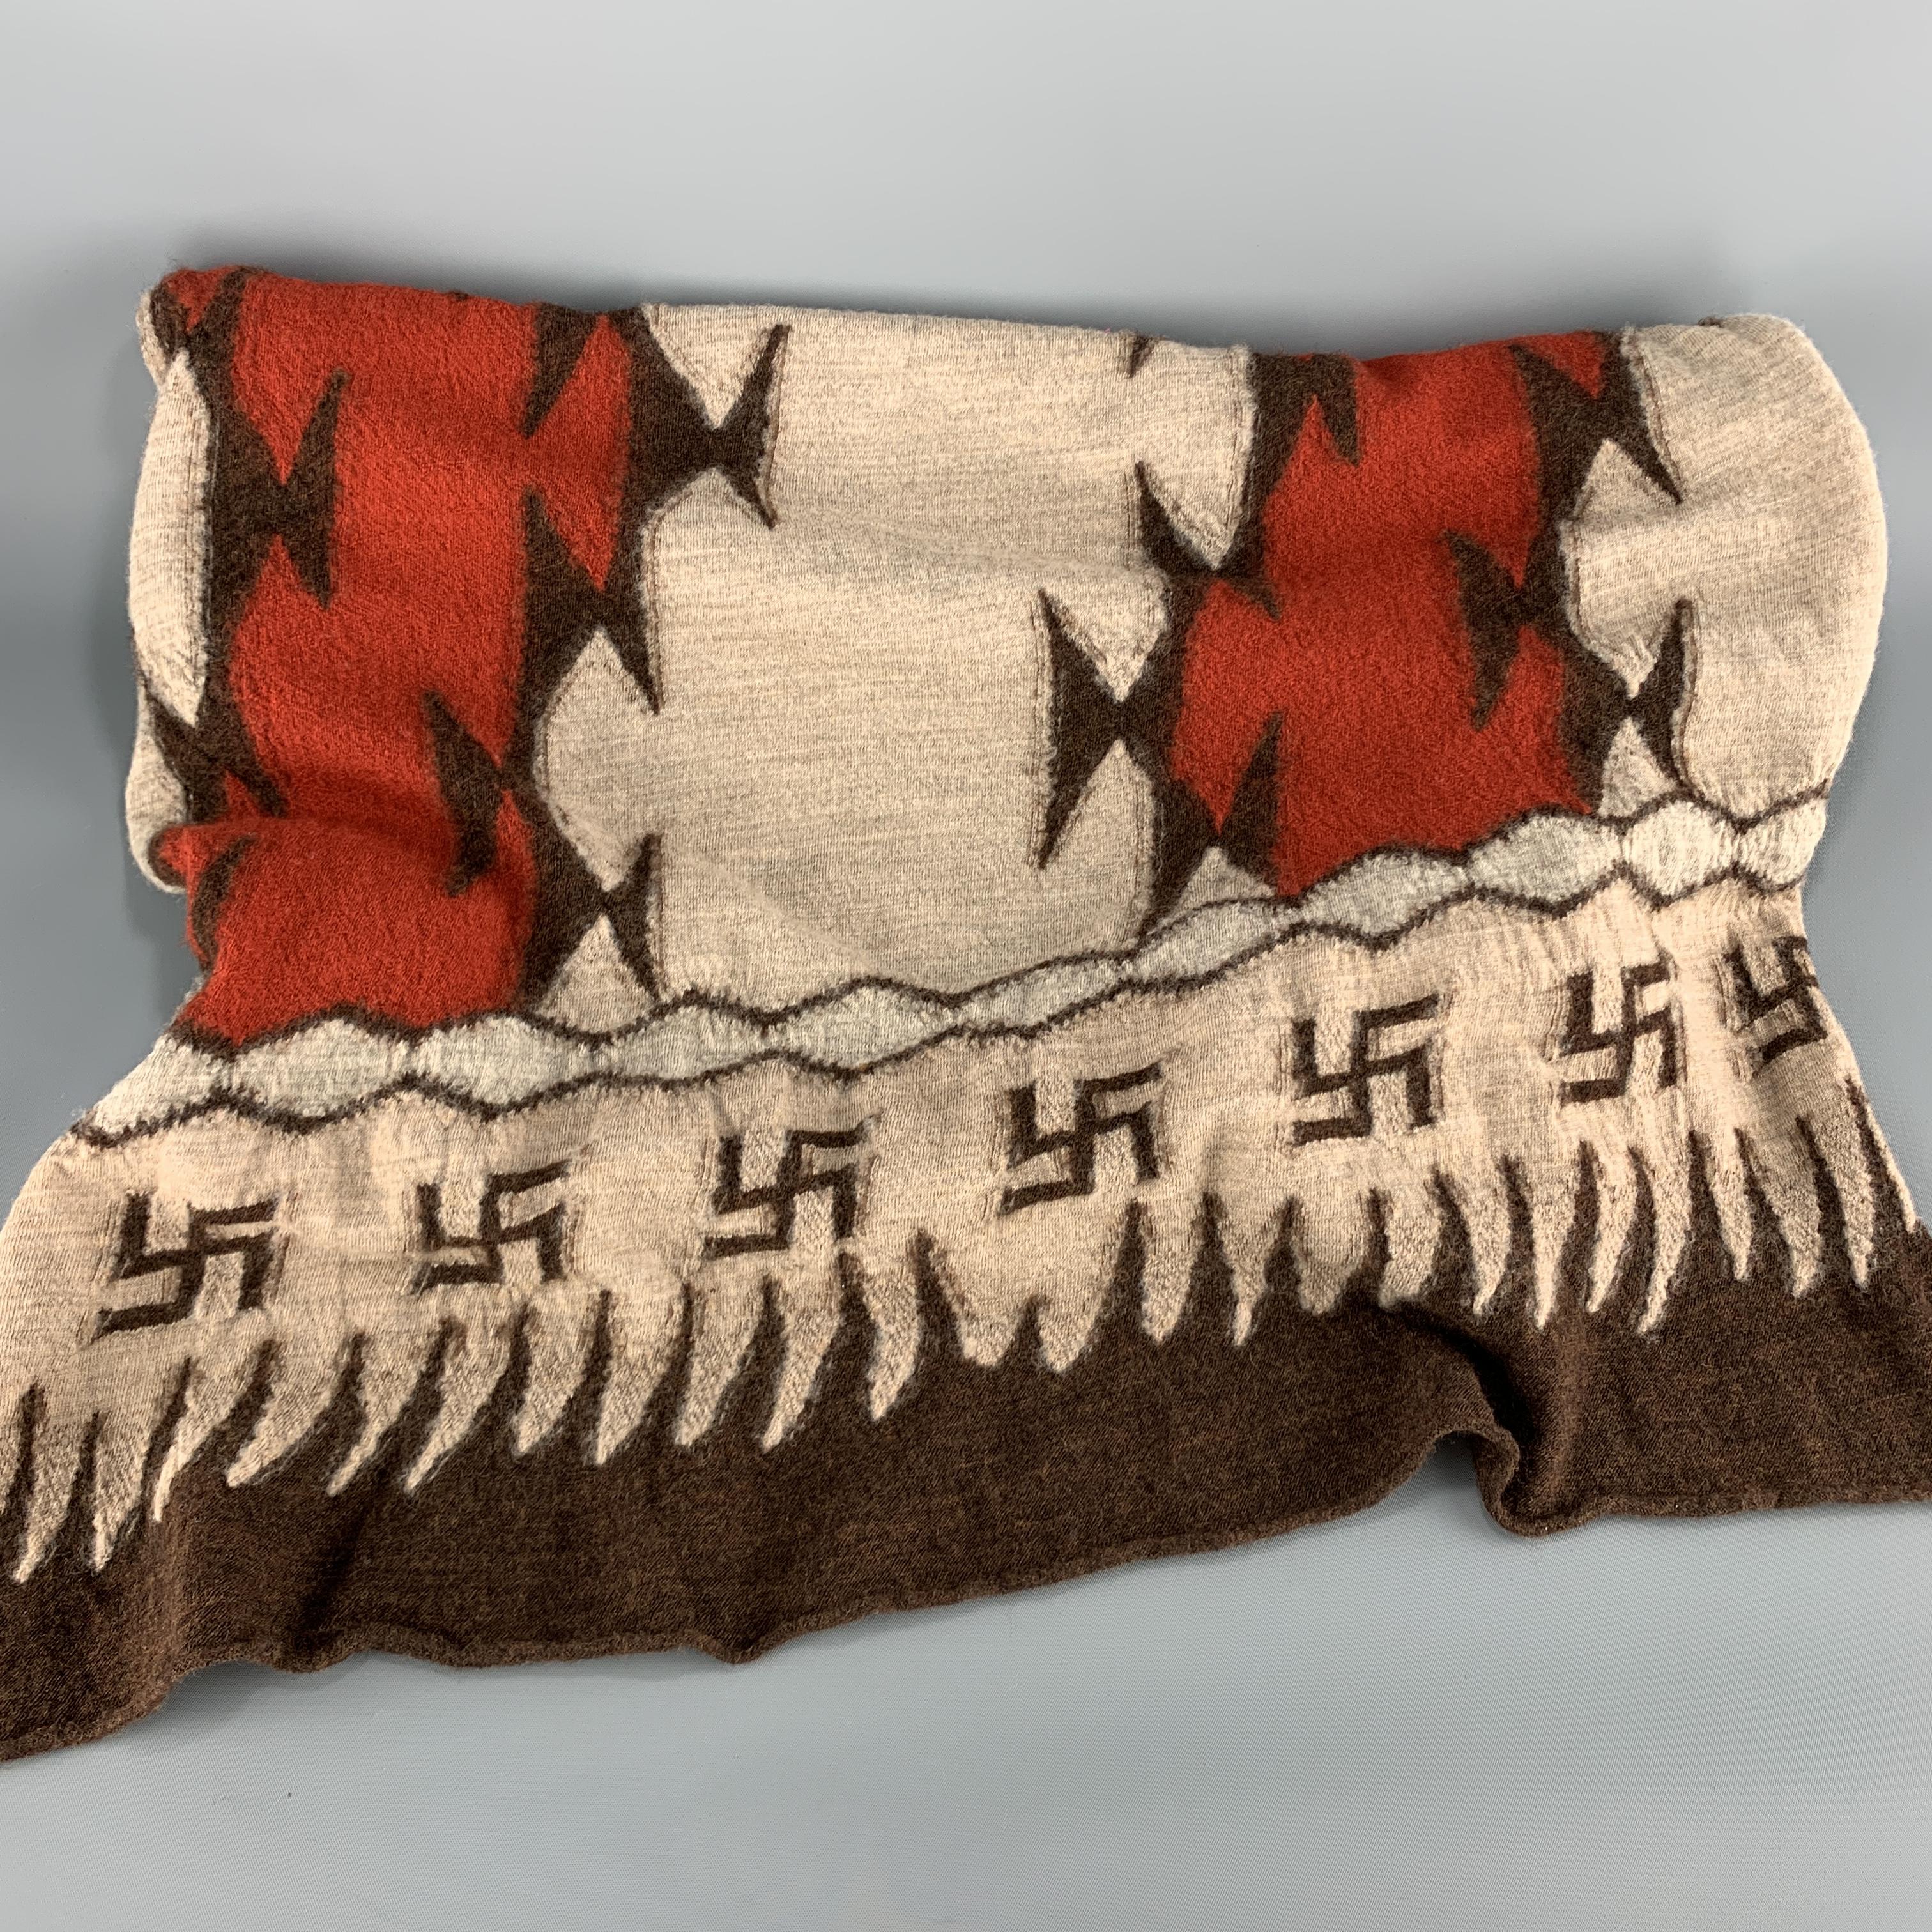 KAPITAL scarf comes in beige wool jersey knit with a brown and orange pattern throughout and Buddhist peace sign print trim. Made in Japan.

New with Tags. 

96 x 27 in.